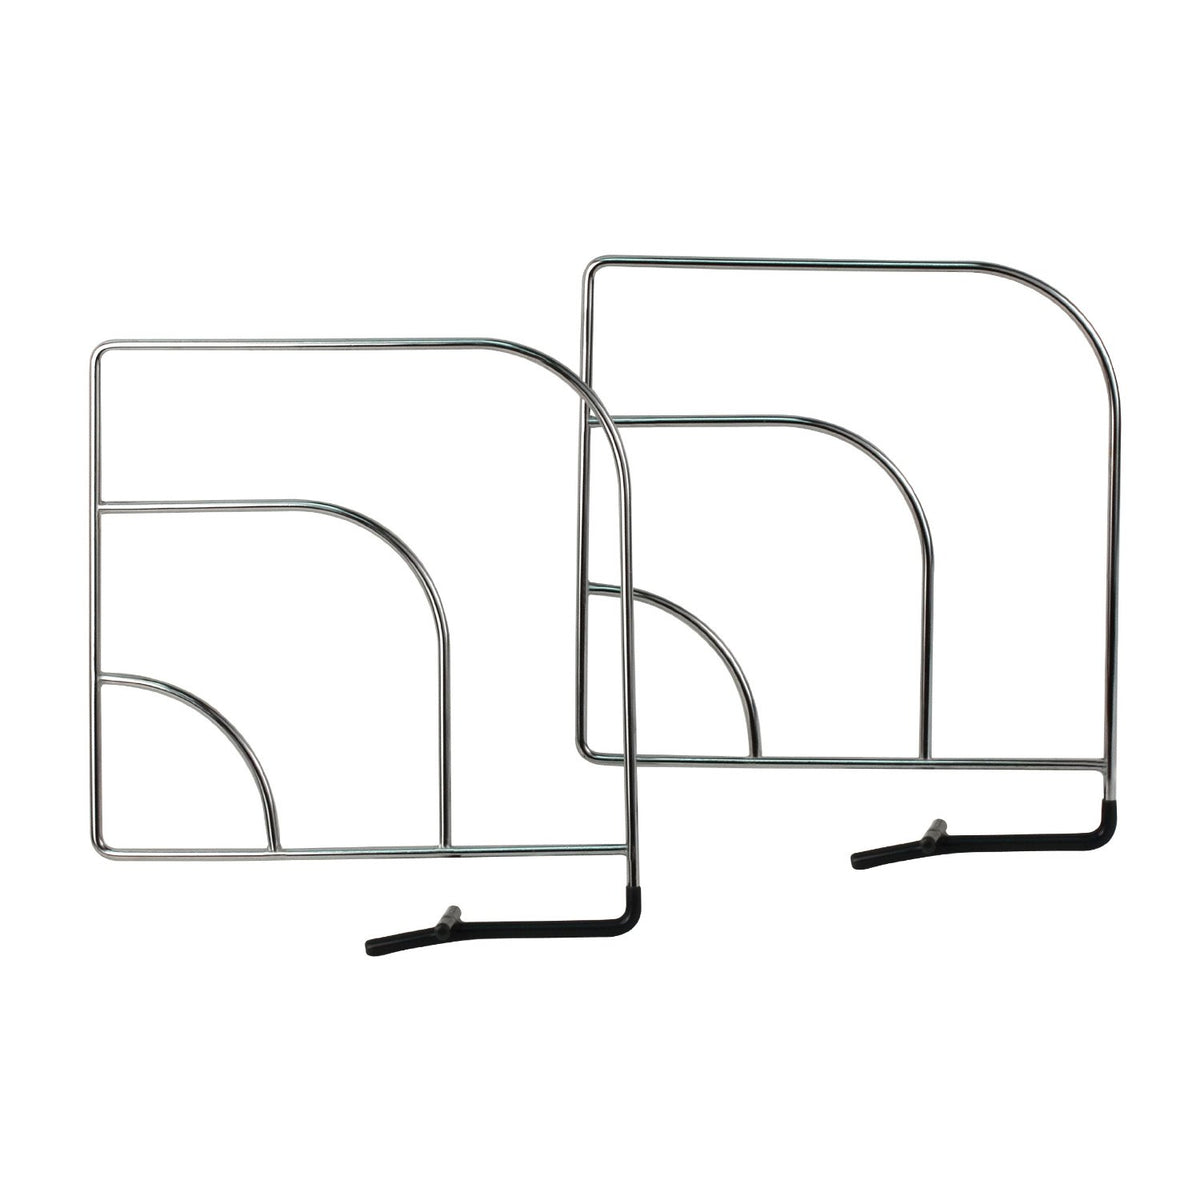 Spectrum 77070 Diversified Small Curved Shelf Divider, Chrome